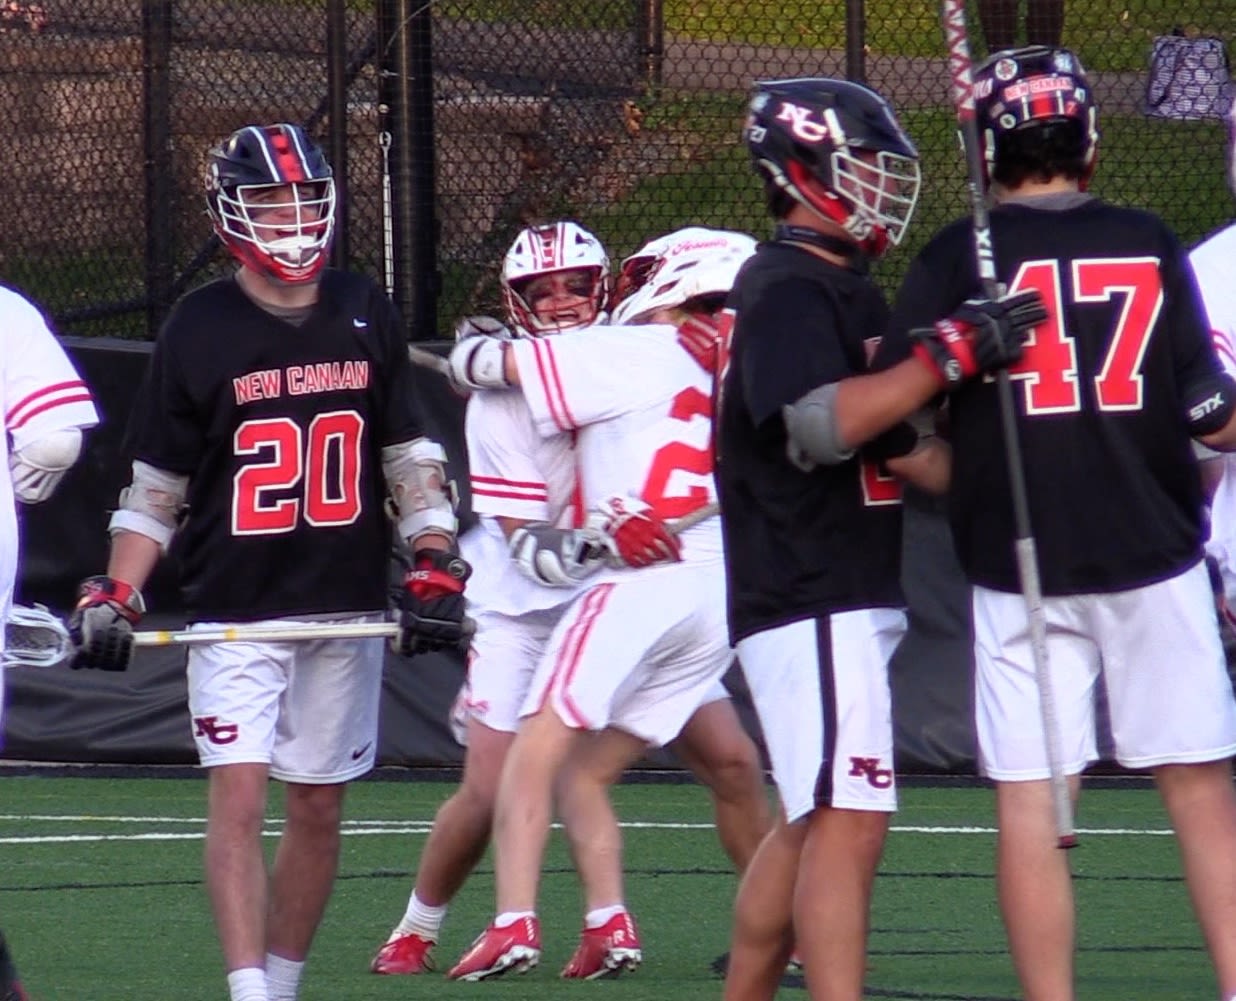 Fairfield Prep lacrosse shuts out New Canaan in second half of showdown between top two teams in CT